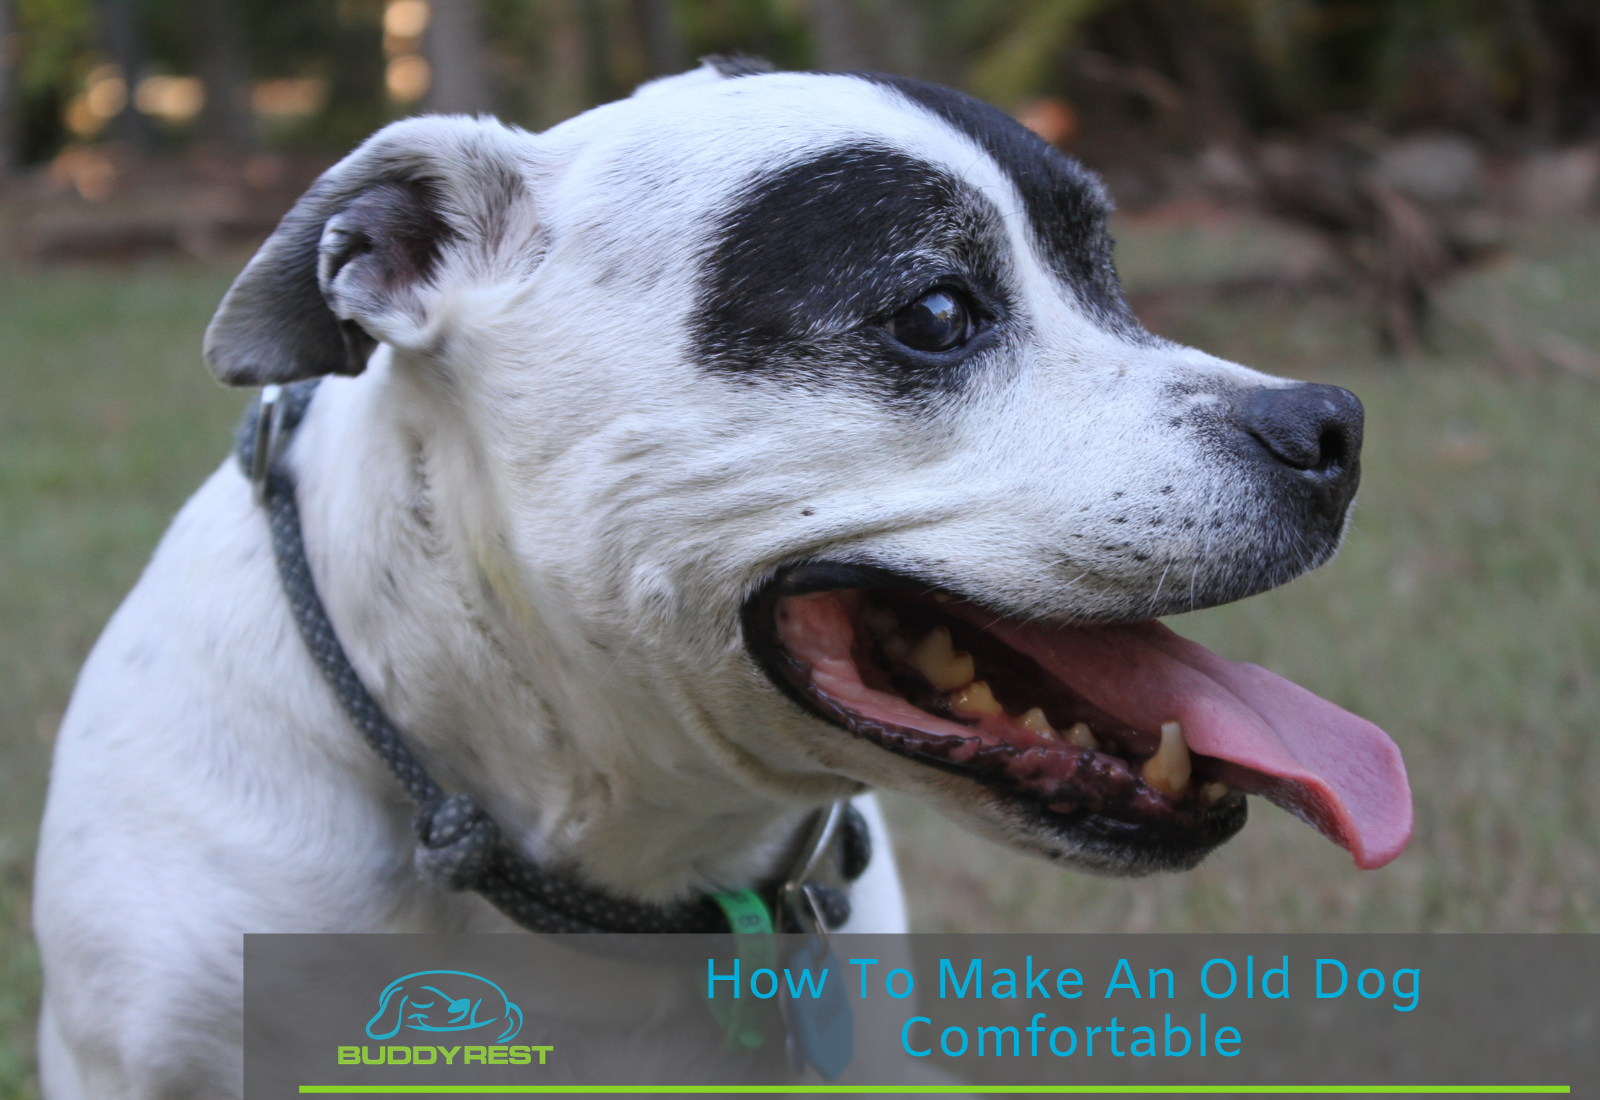 How to make an old dog comfortable